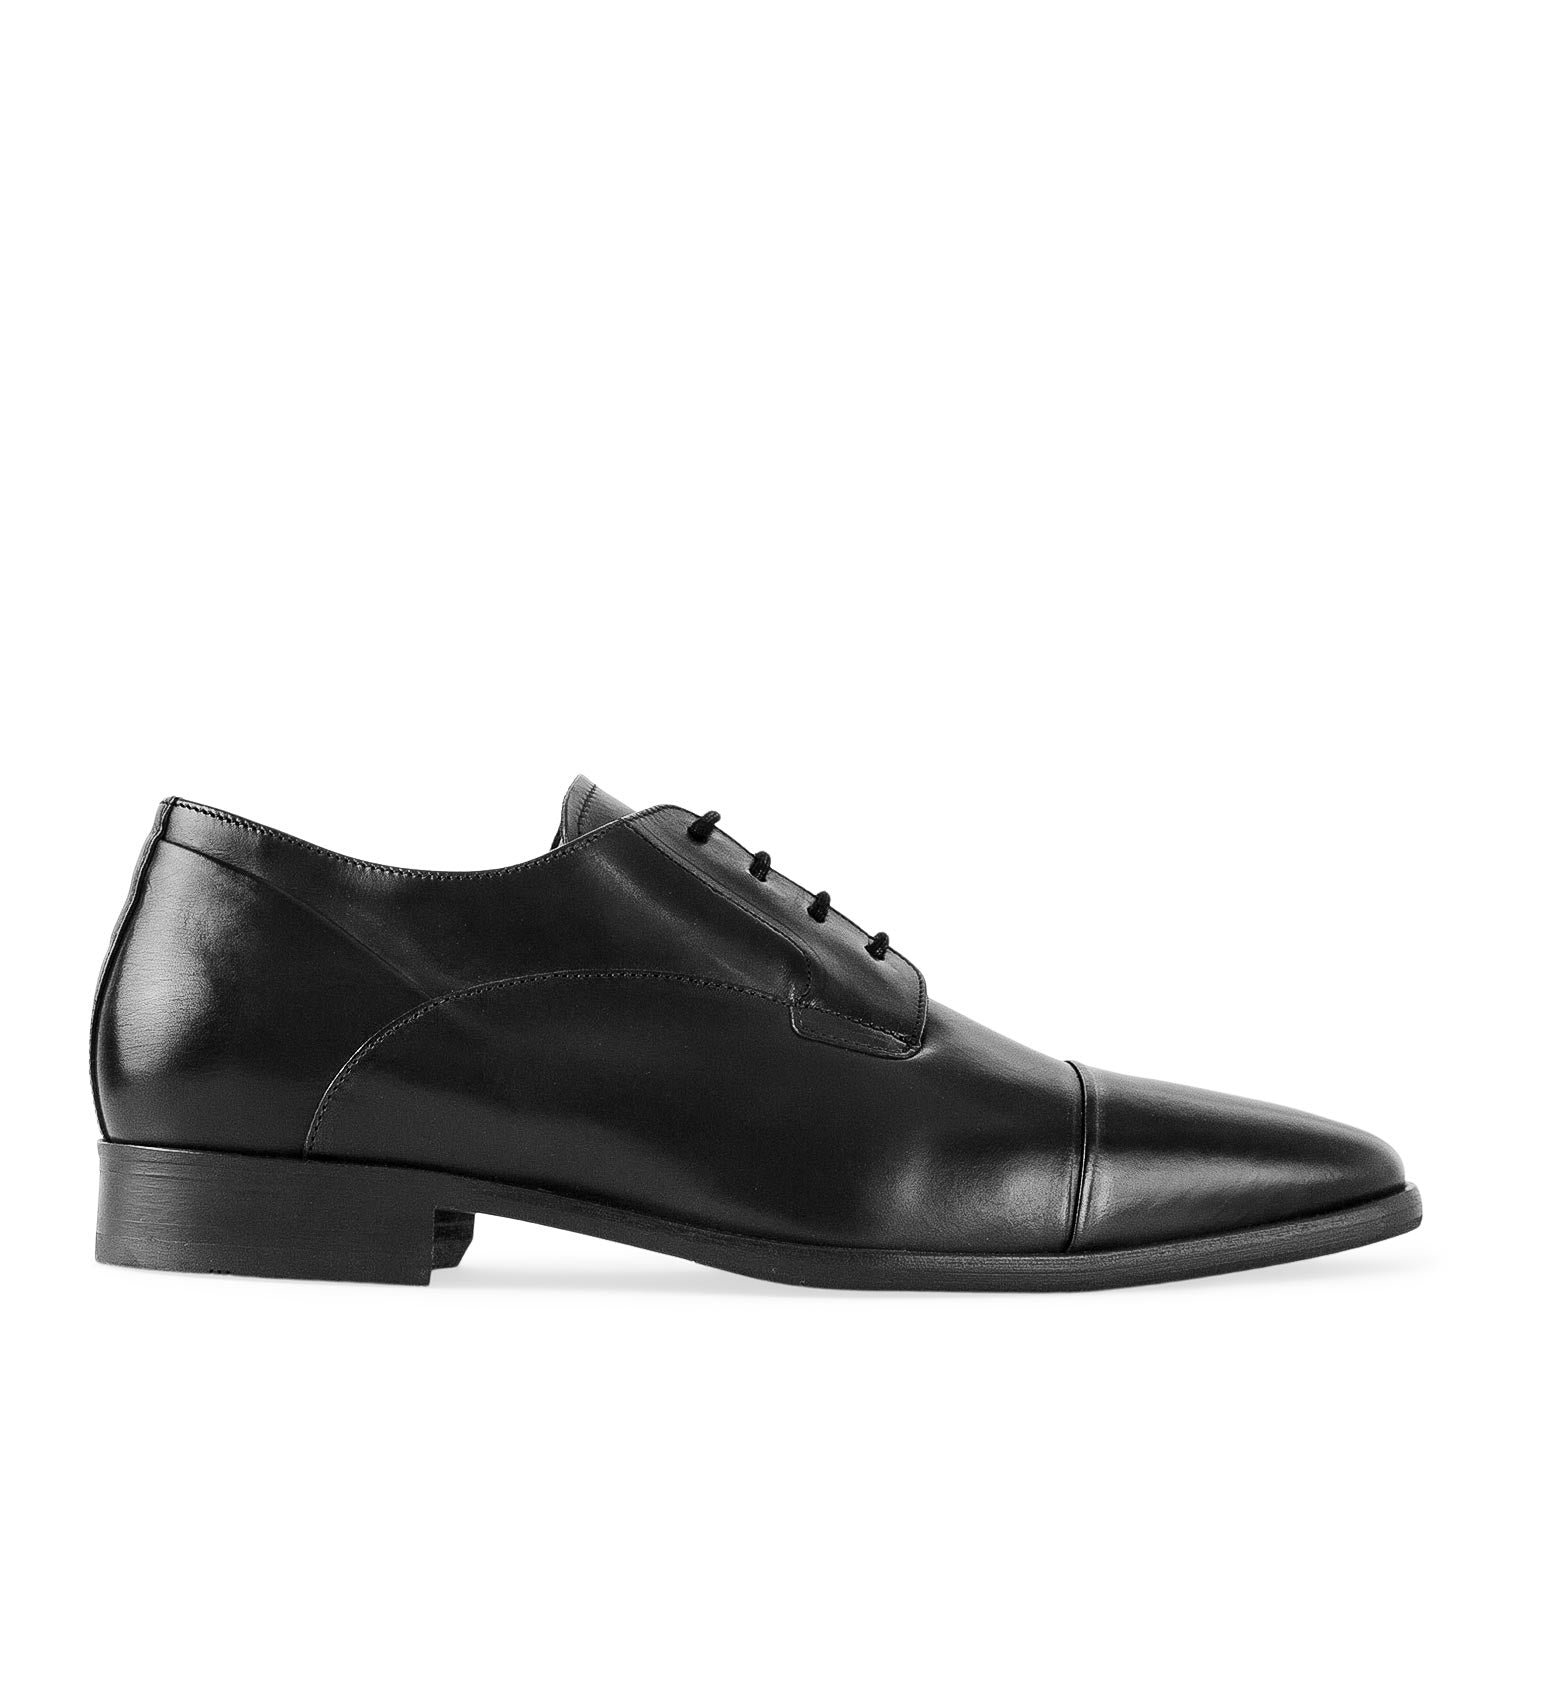 Osmium Black Leather Lace Up Dress Shoes | Bared Footwear